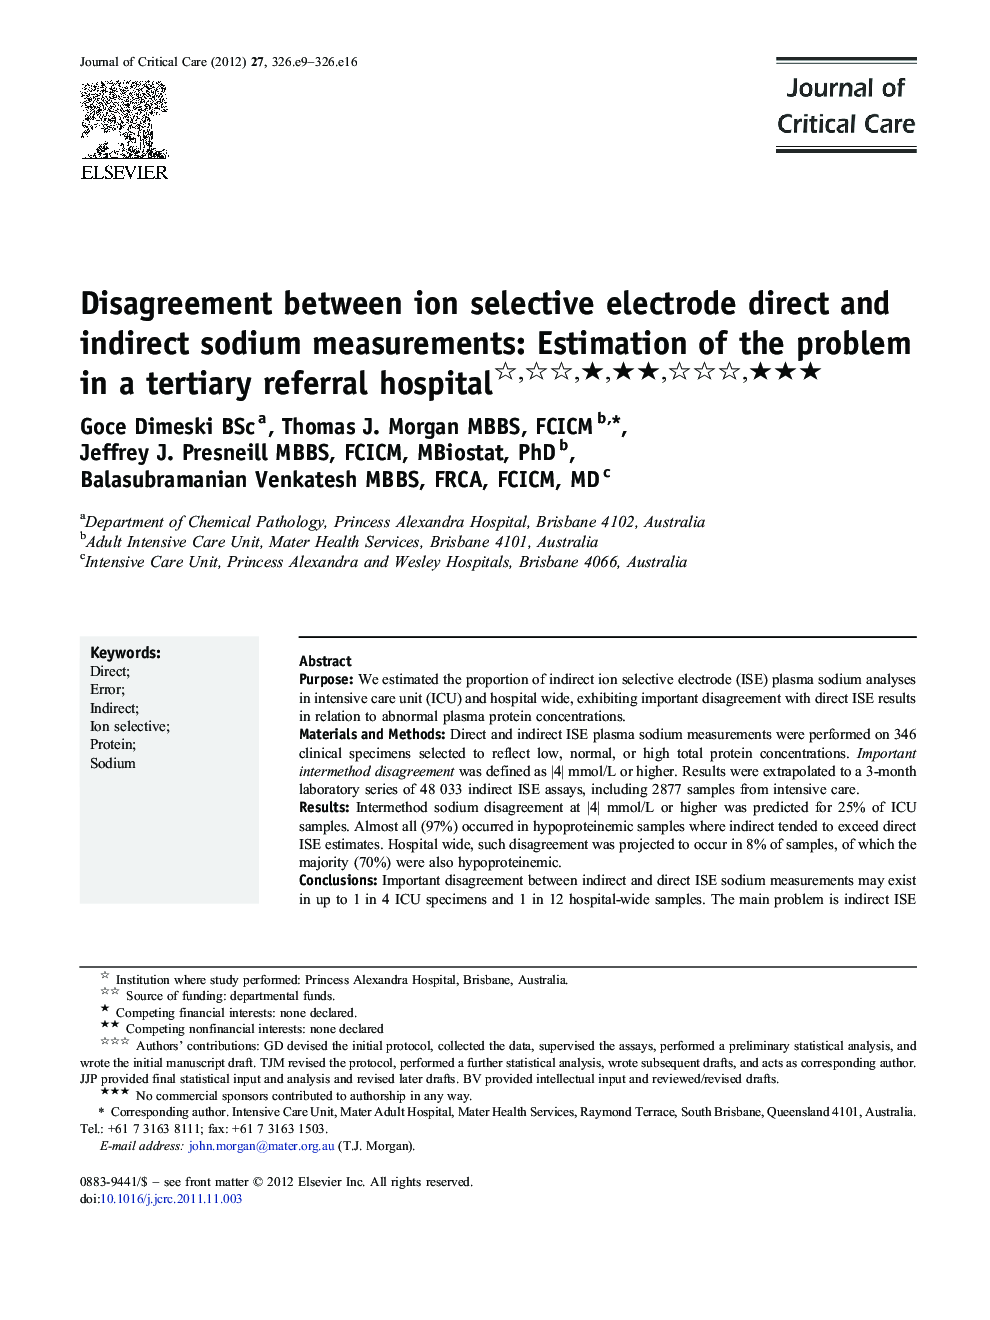 Disagreement between ion selective electrode direct and indirect sodium measurements: Estimation of the problem in a tertiary referral hospital